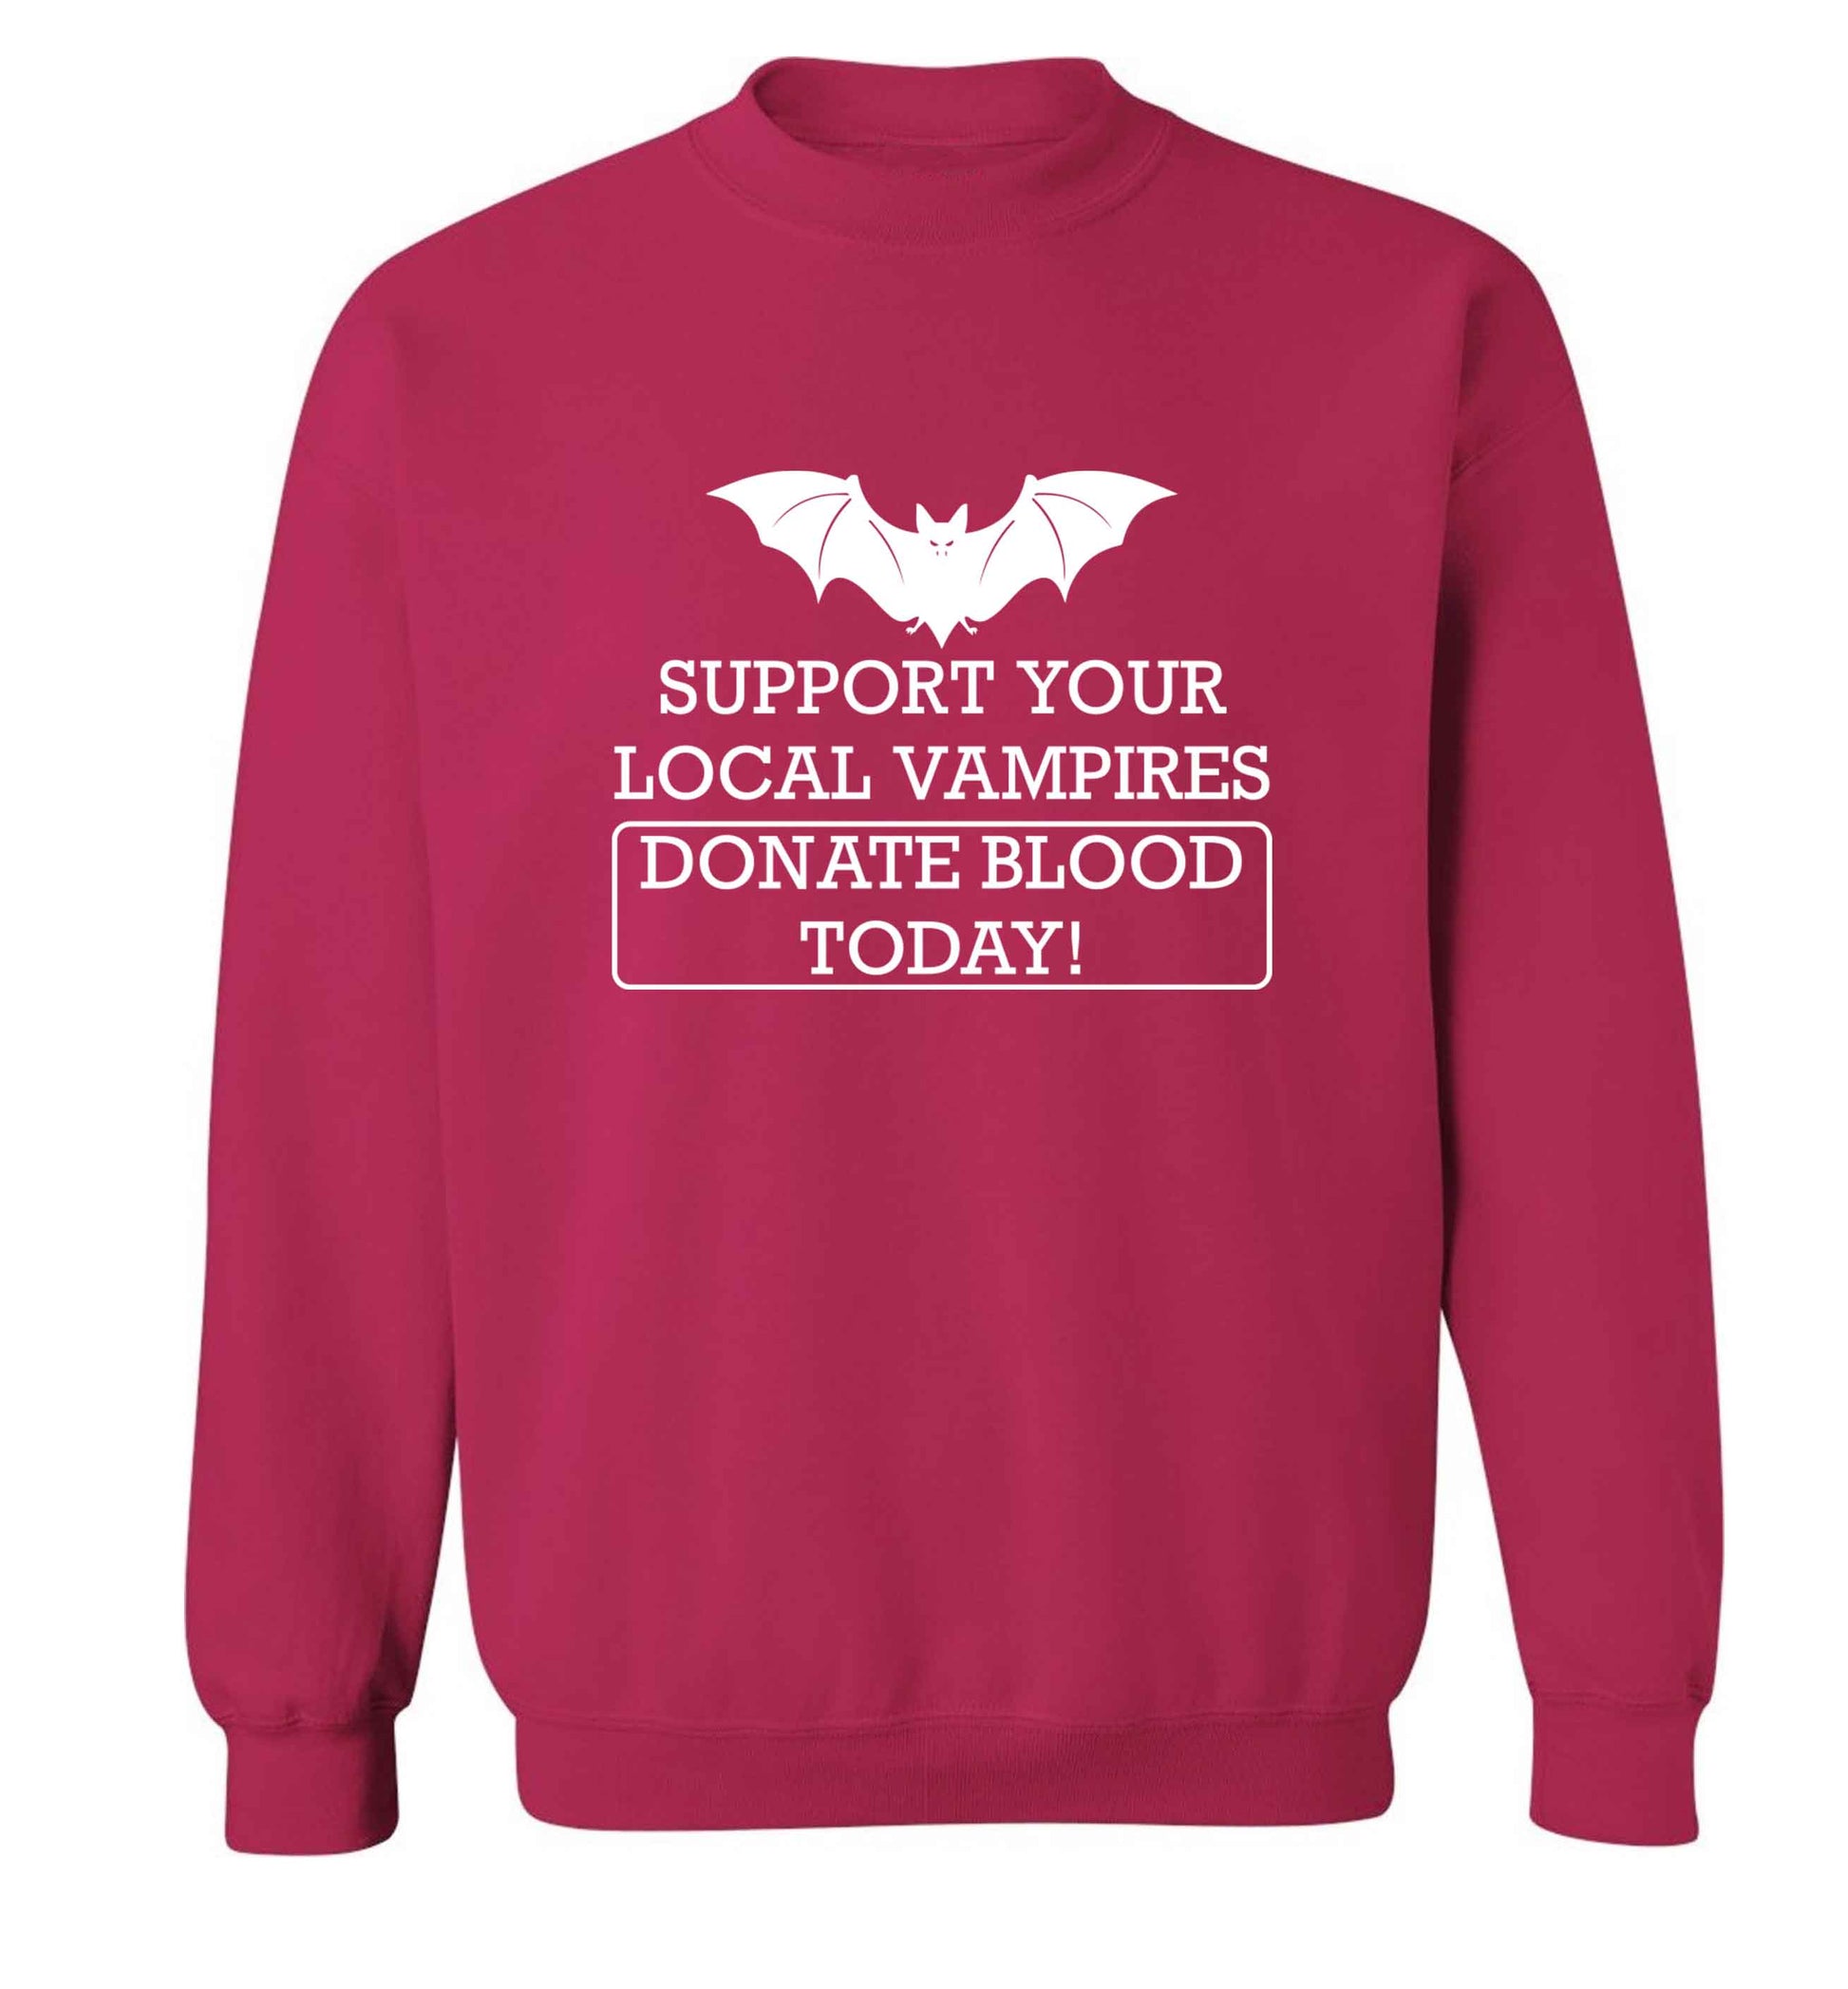 Support your local vampires donate blood today! adult's unisex pink sweater 2XL